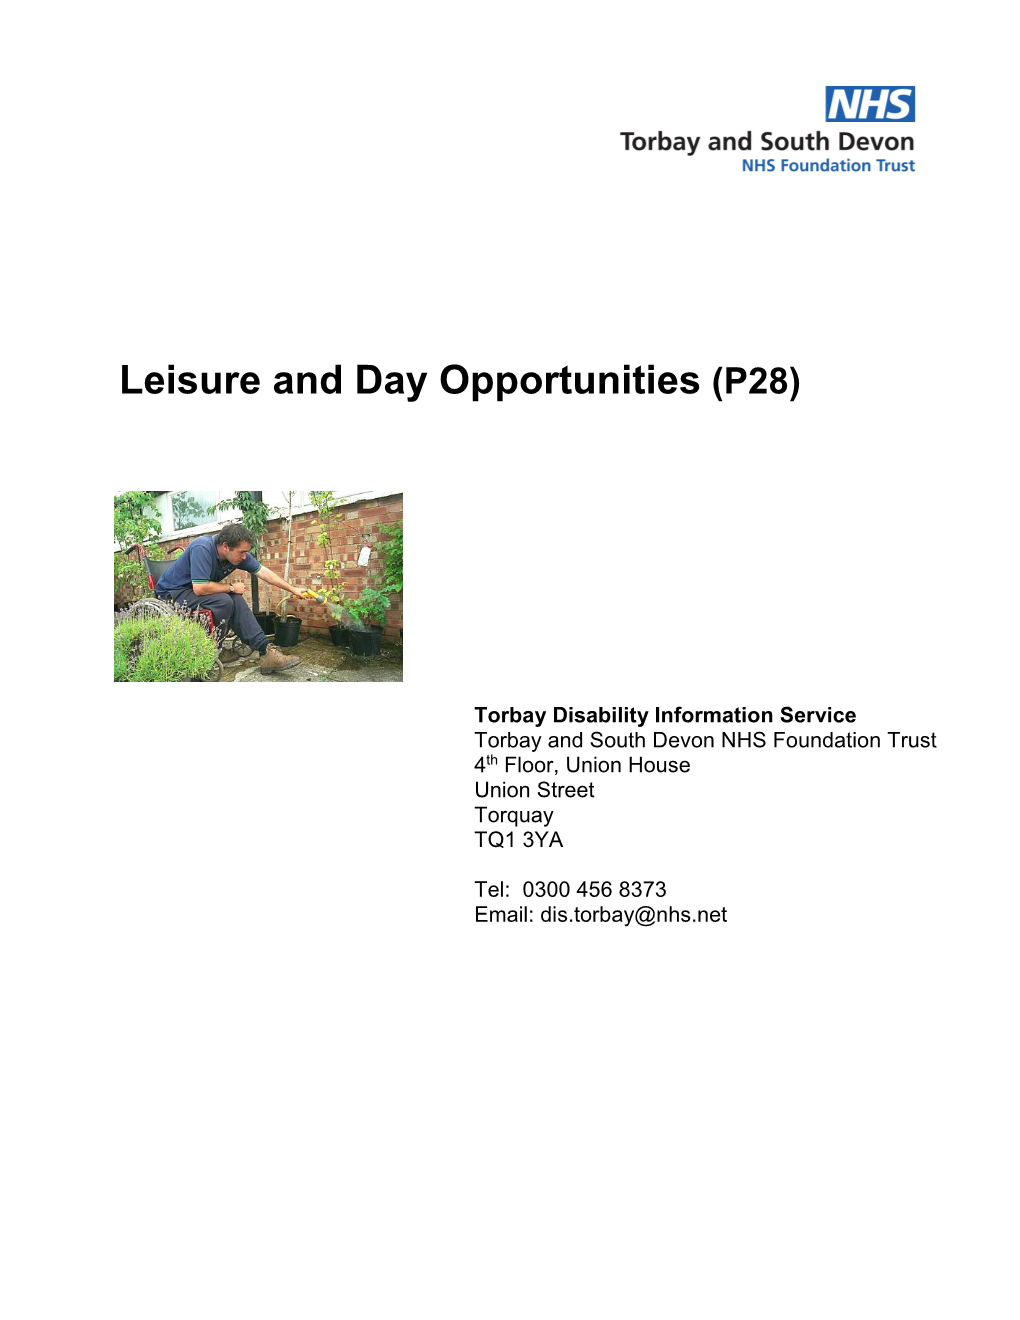 Leisure and Day Opportunities (P28)